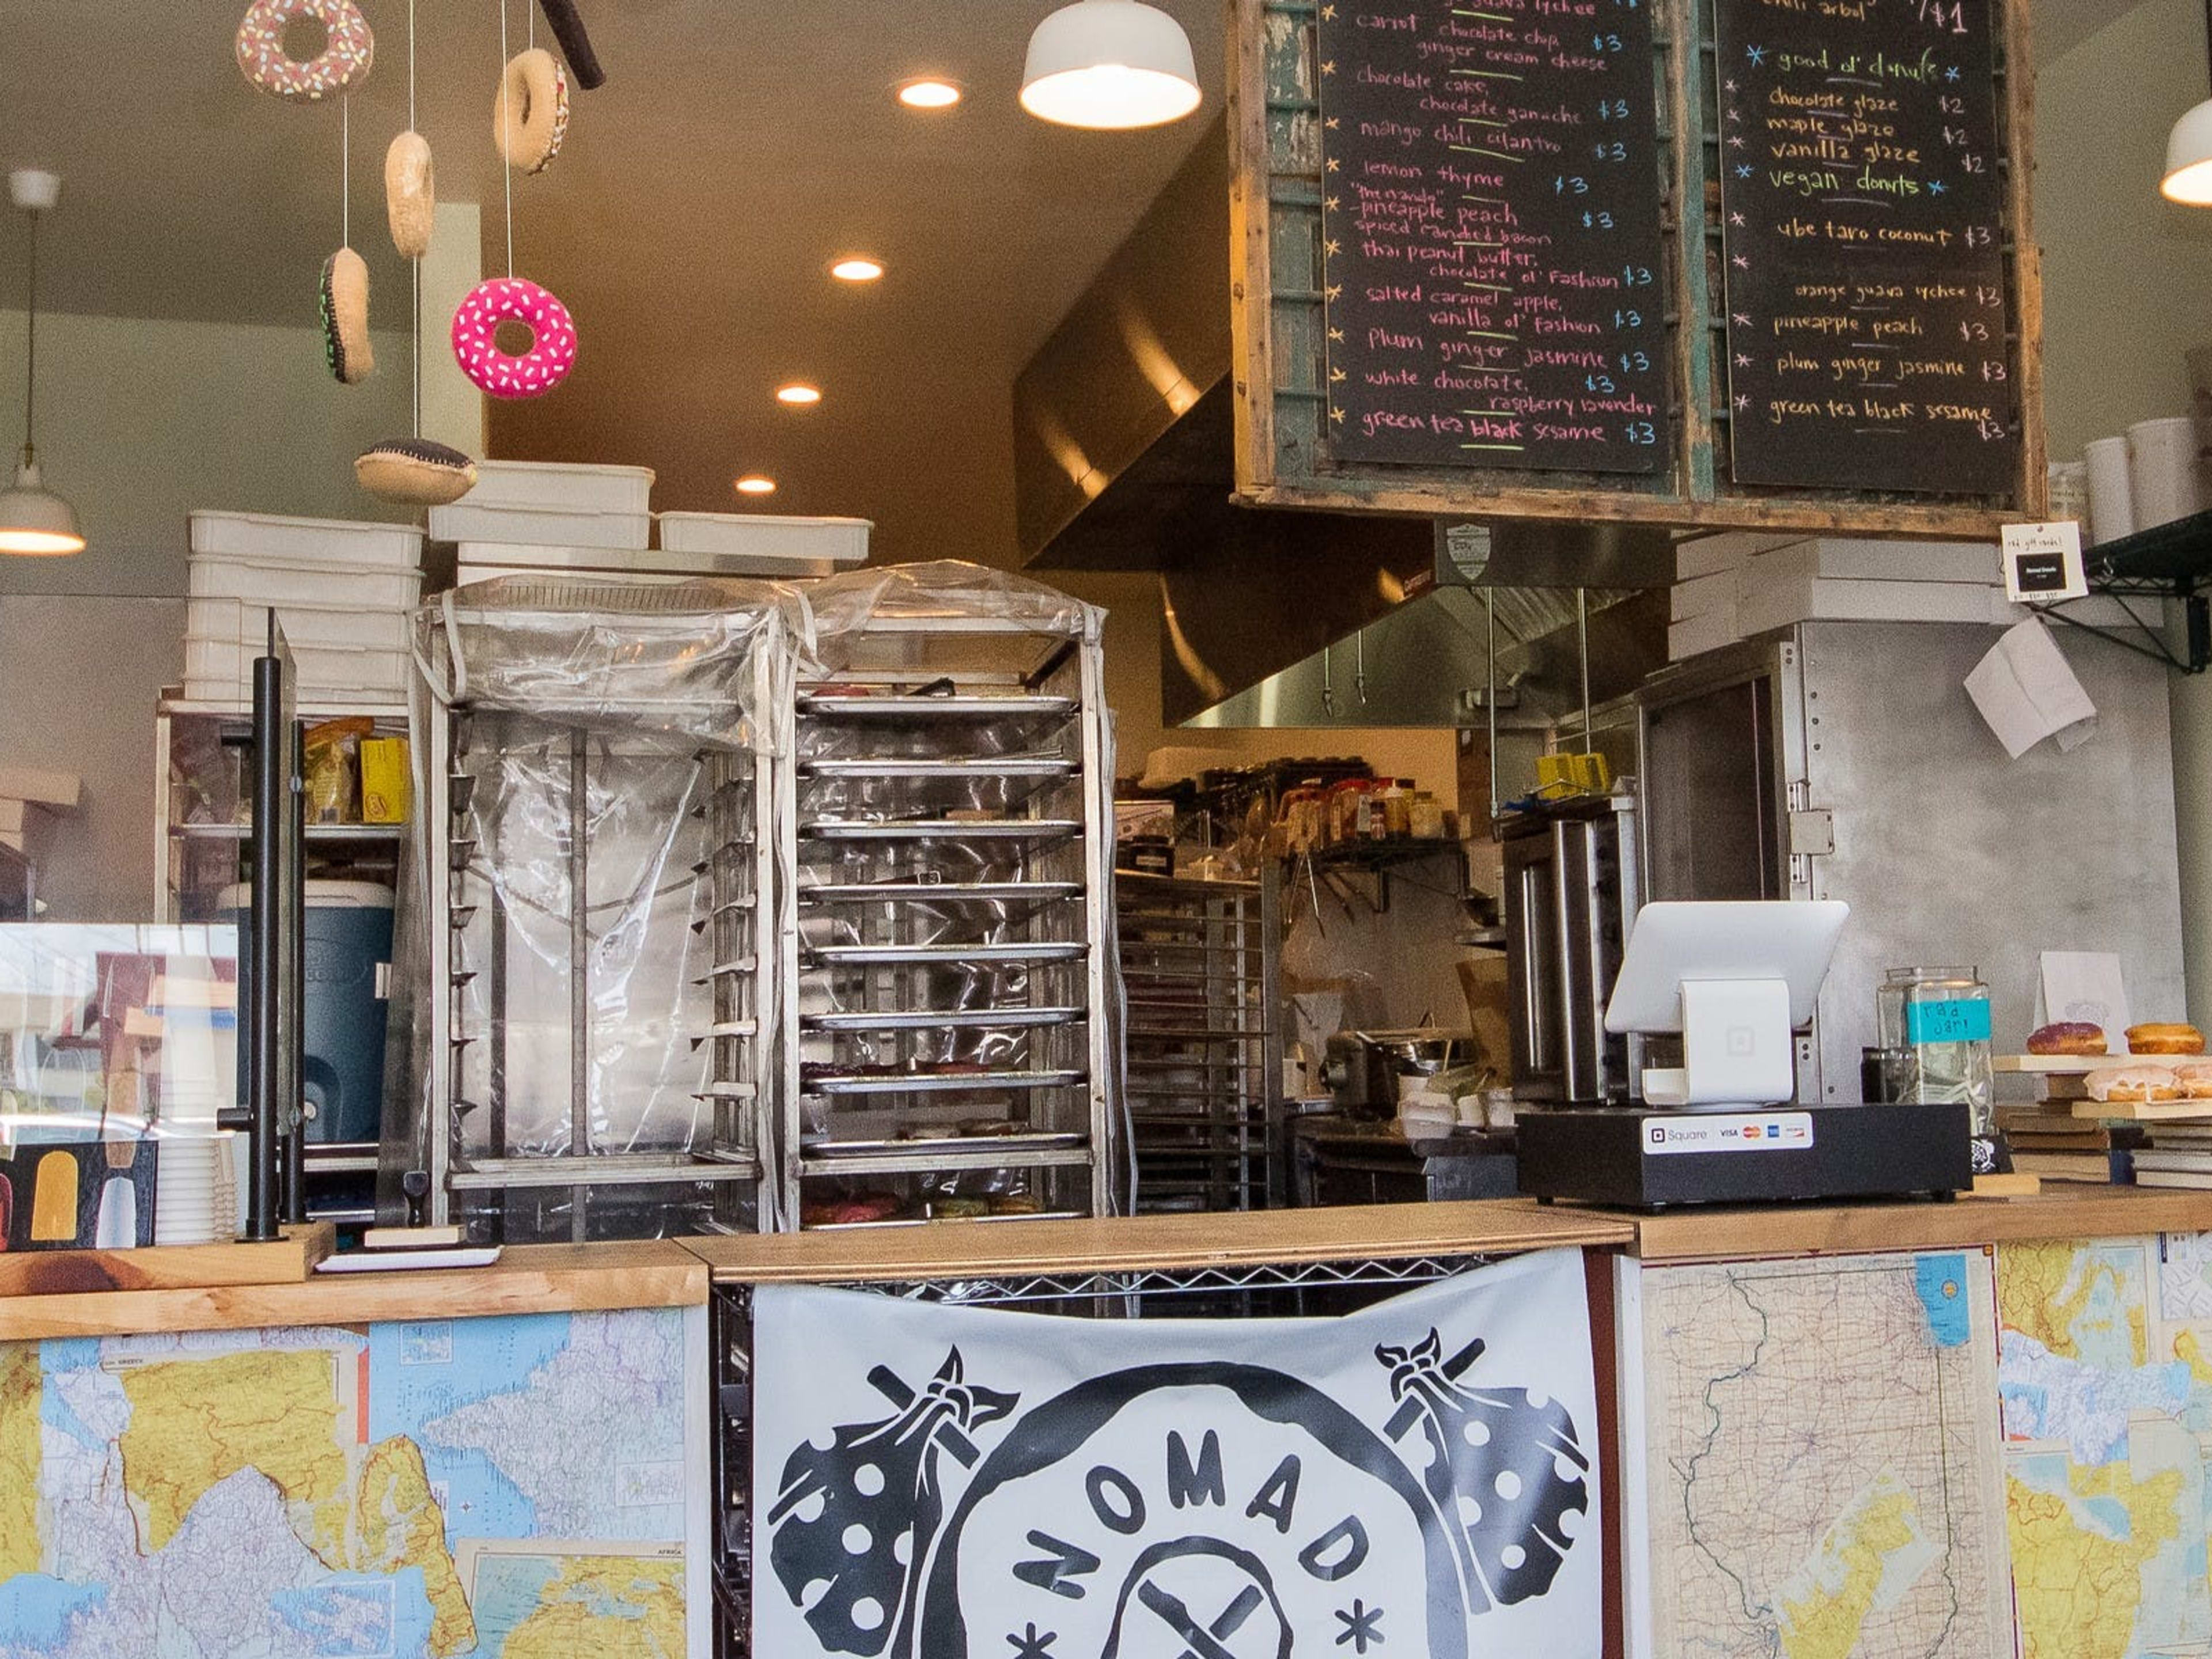 Nomad Donuts image